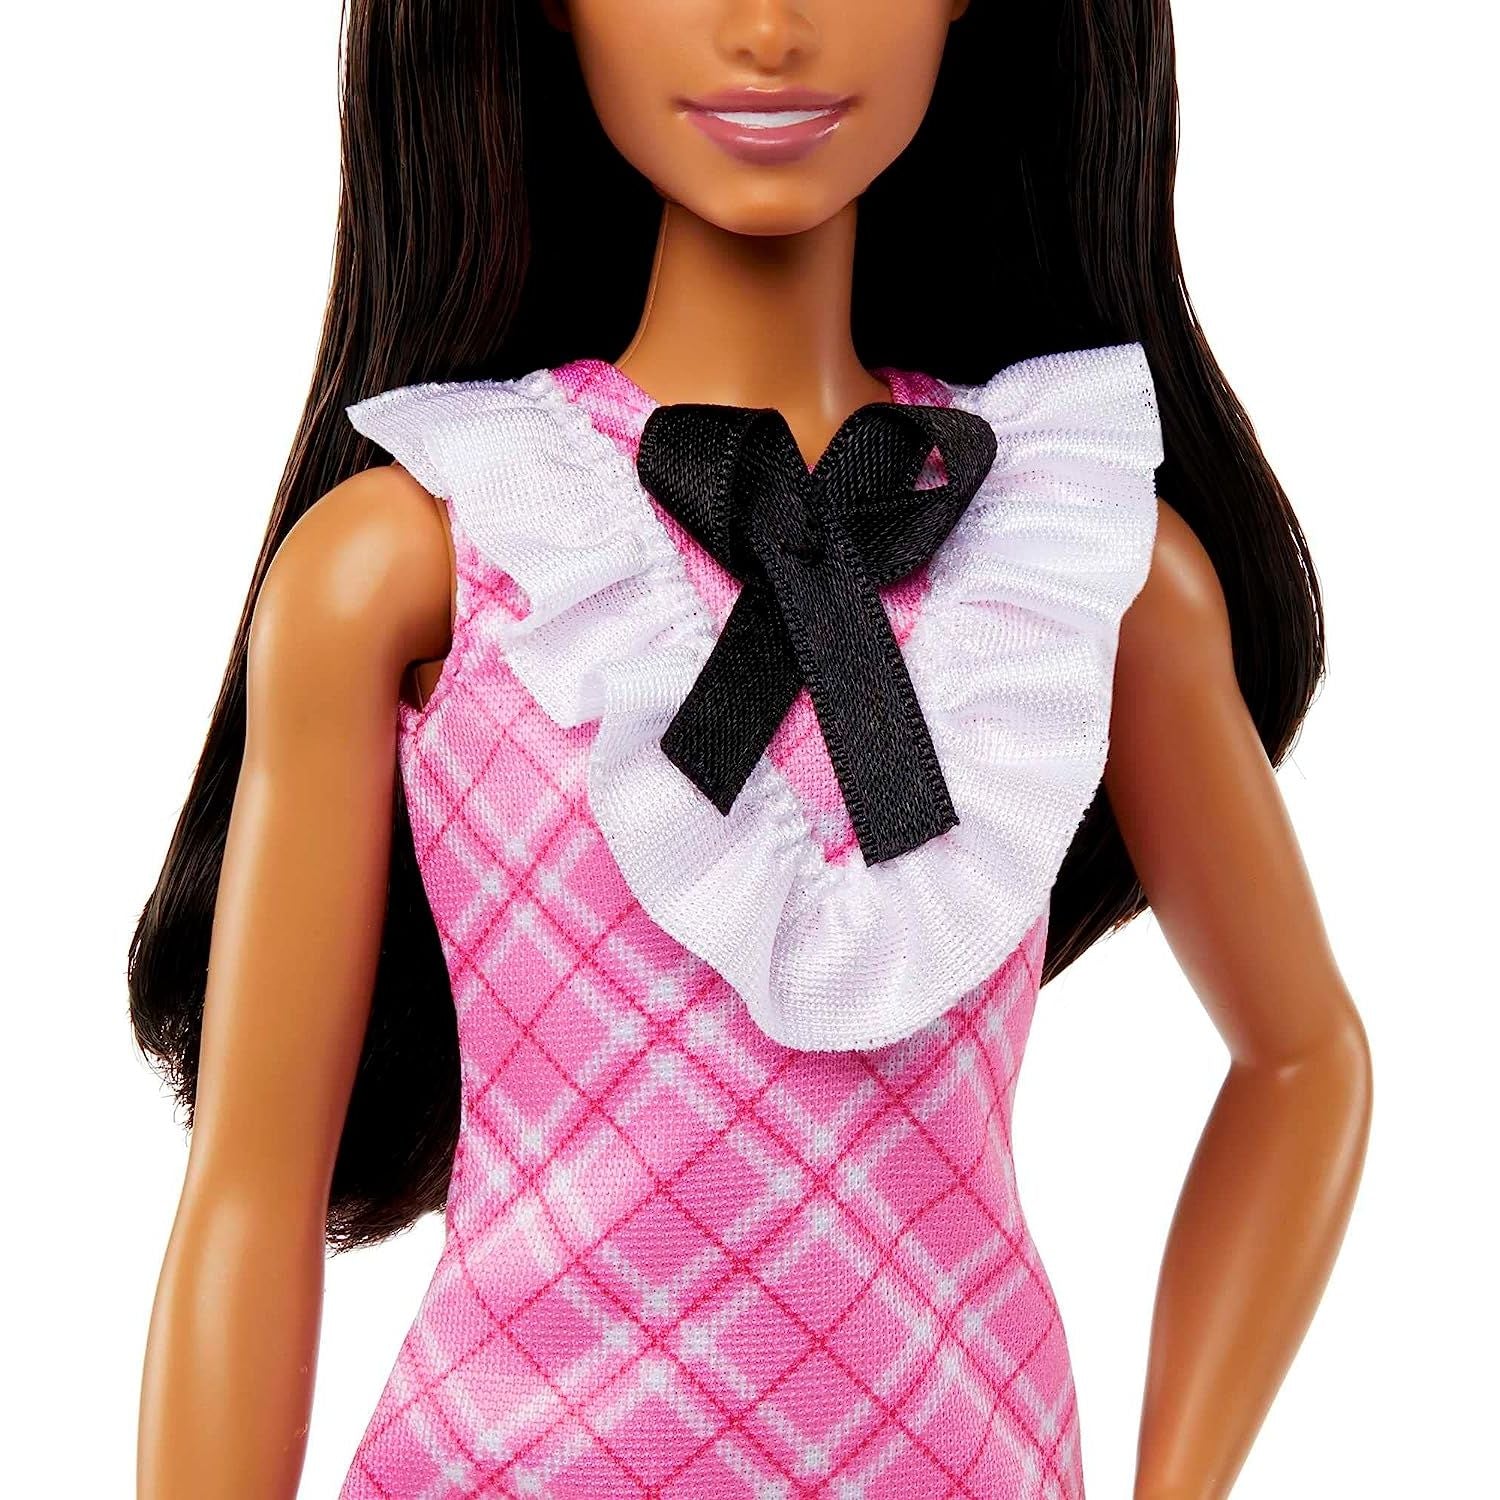 Mattel Barbie Fashionistas Doll #209 with Black Hair Wearing a Pink Plaid Dress, Pearlescent Headband and Strappy Heels